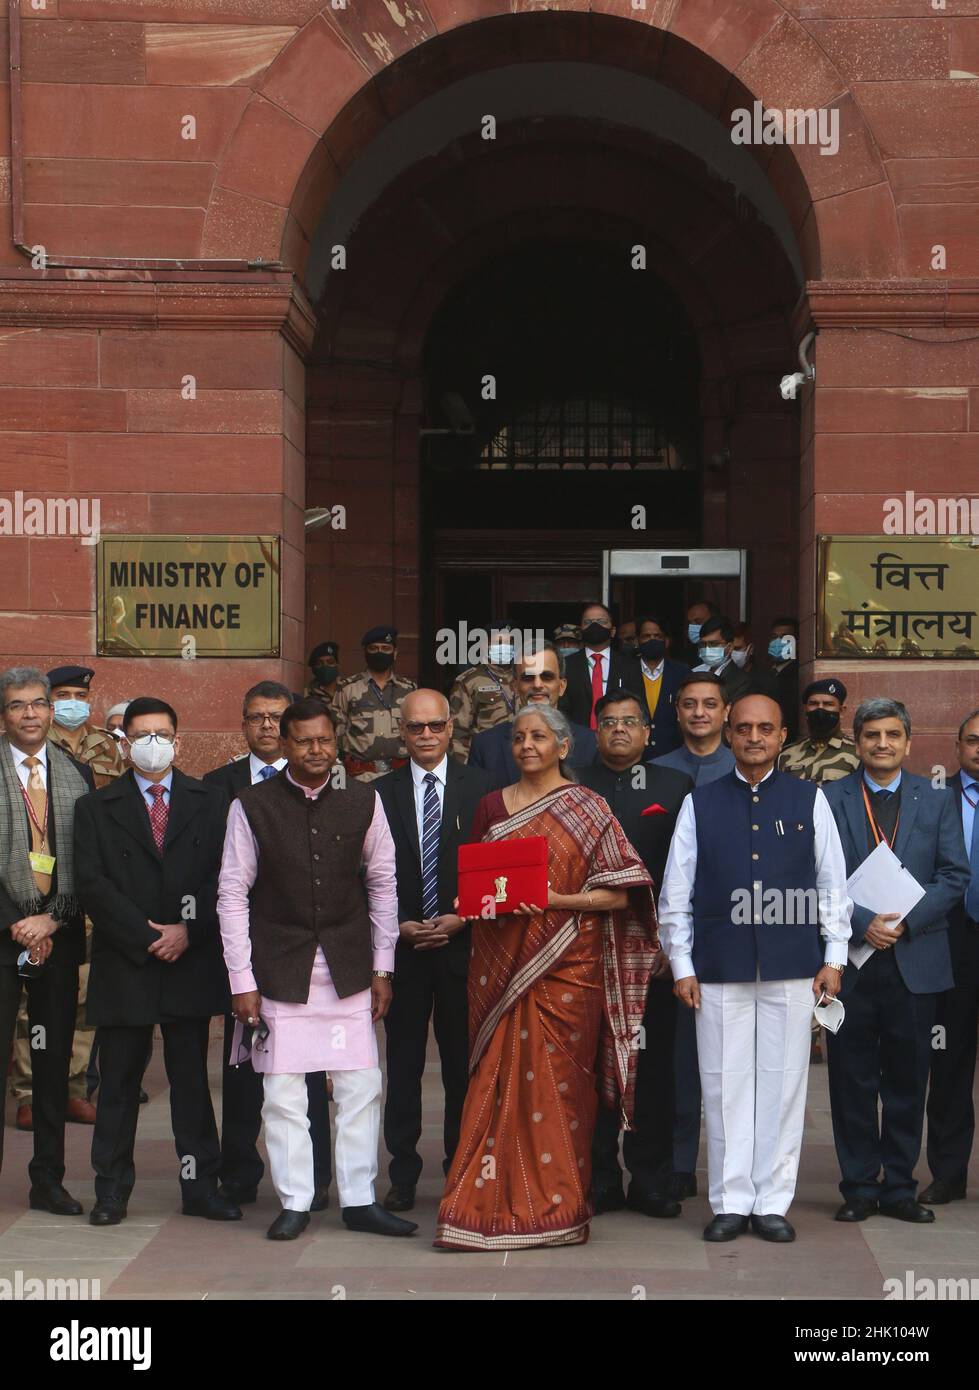 NEW DELHI, INDIA - FEBRUARY 1: Union Minister of Finance Nirmala Sitharaman is seen holding the tab instead of traditional ‘bahi khata' along with MoS Finance Pankaj Chaudhary, Bhagwat Karad and other senior officials before leaving from Ministry of Finance to the Parliament to present Union Budget 2022-23 on February 1, 2022 in New Delhi, India. Nirmala Sitharaman, who presented Union Budget 2022 in Parliament on Tuesday, said that it will lay the foundation for economic growth through public investment as Asia's third-largest economy emerges from a pandemic-induced slump. (Photo by Salman Al Stock Photo